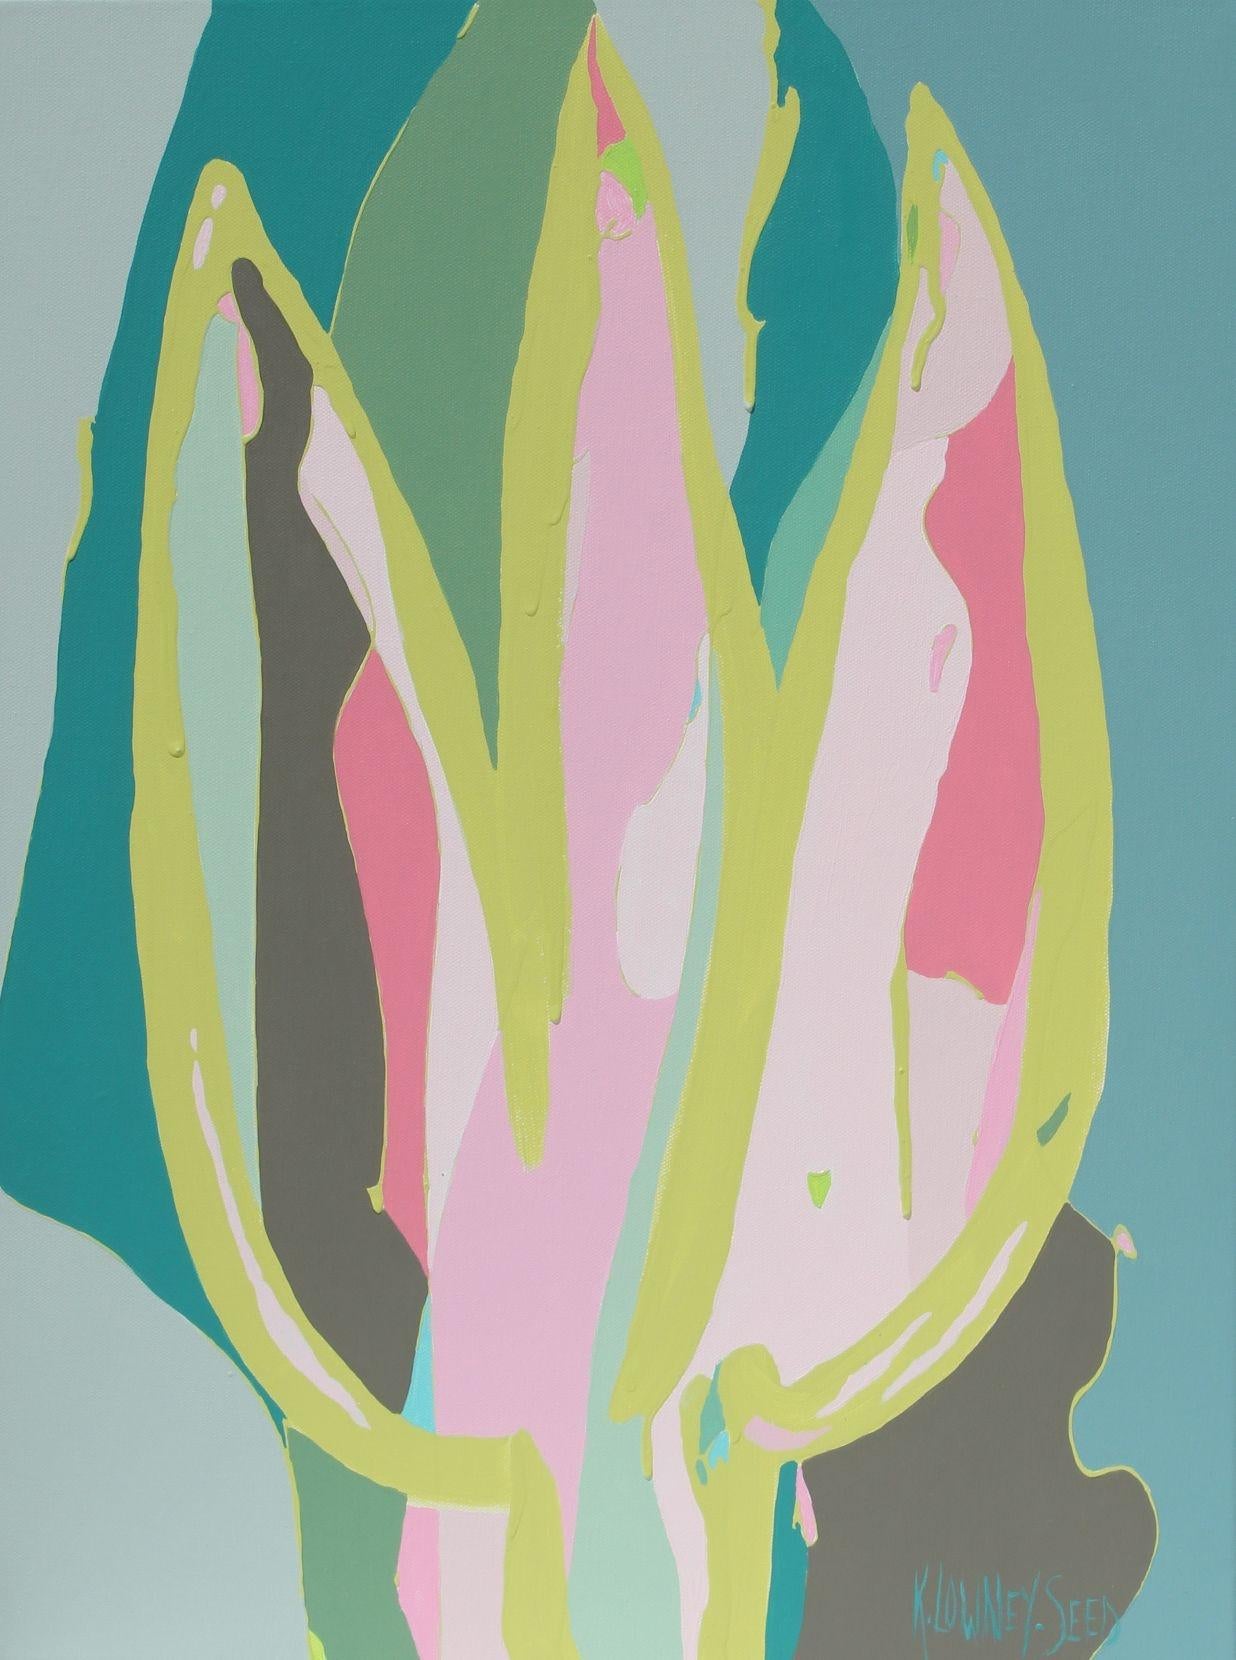 Karin Lowney-Seed Abstract Painting - Tulip Mania #13 Pink and Teal, Painting, Acrylic on Canvas